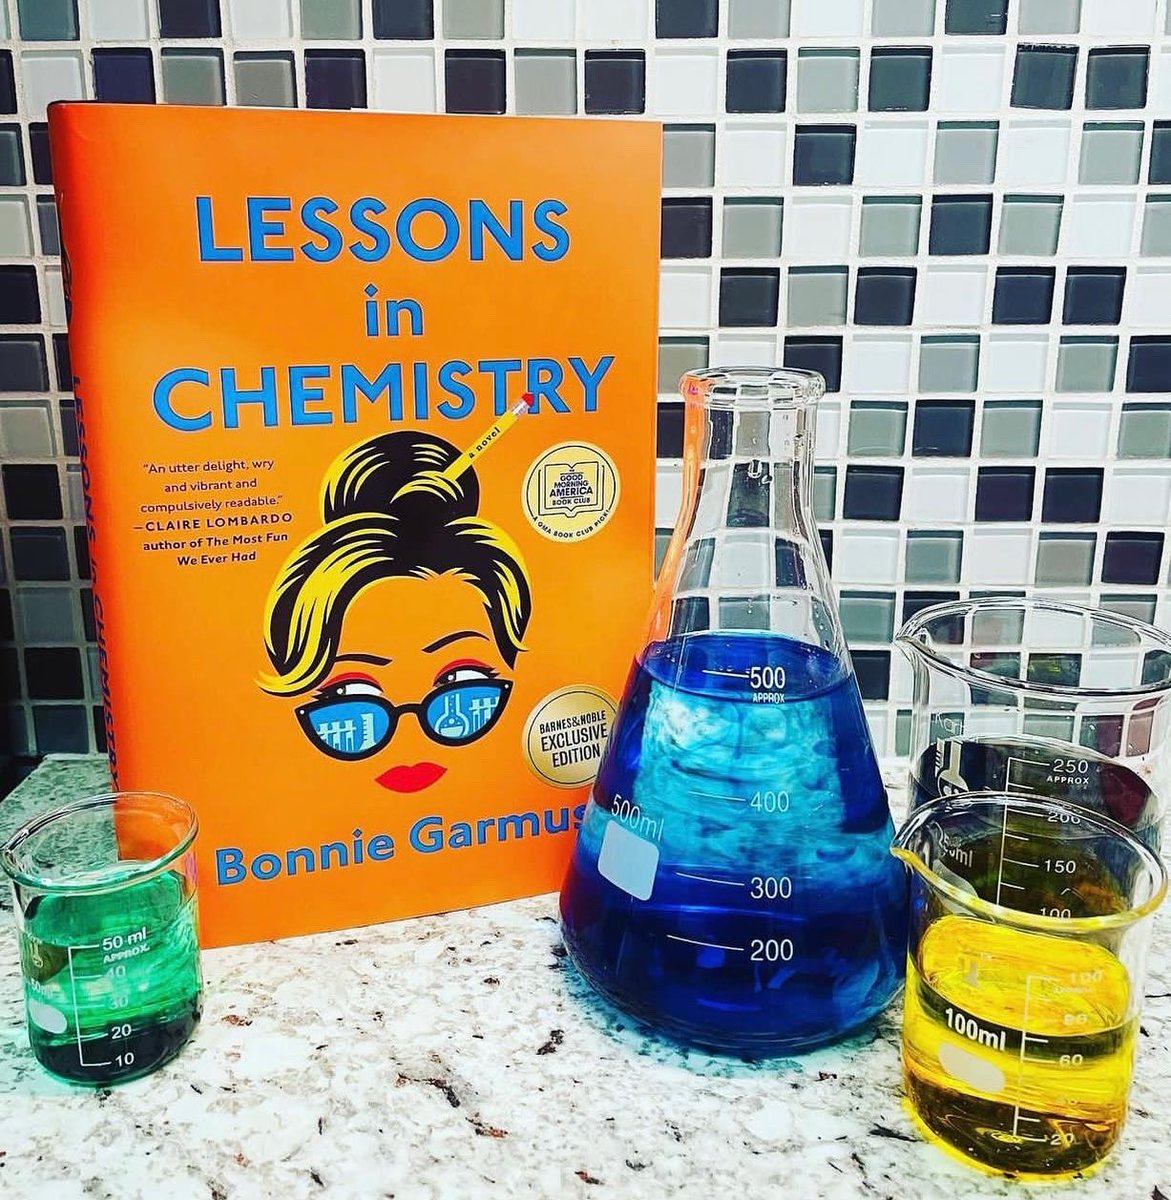 Here it is—the B&N Book of the Year! Lessons in Chemistry by Bonnie Garmus. You’ll fall in love with the characters in this witty debut novel that’s already being turned into a TV series. #bnboty #book #lessonsinchemistry #mustread